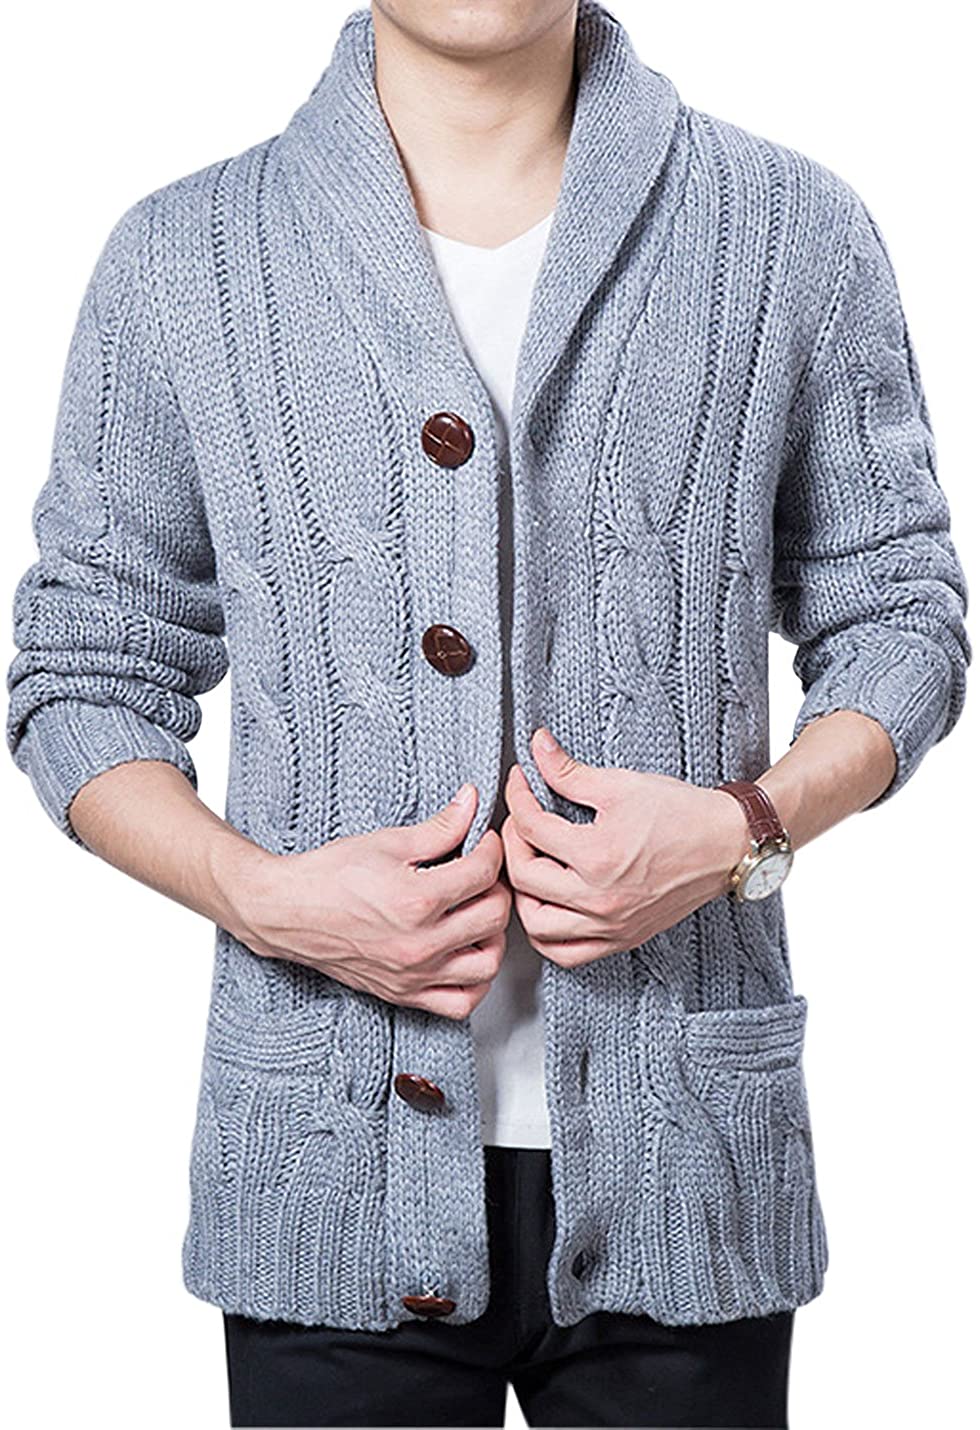 Yeokou Men's Casual Slim Thick Knitted Shawl Collar Cardigan Sweaters Pockets 